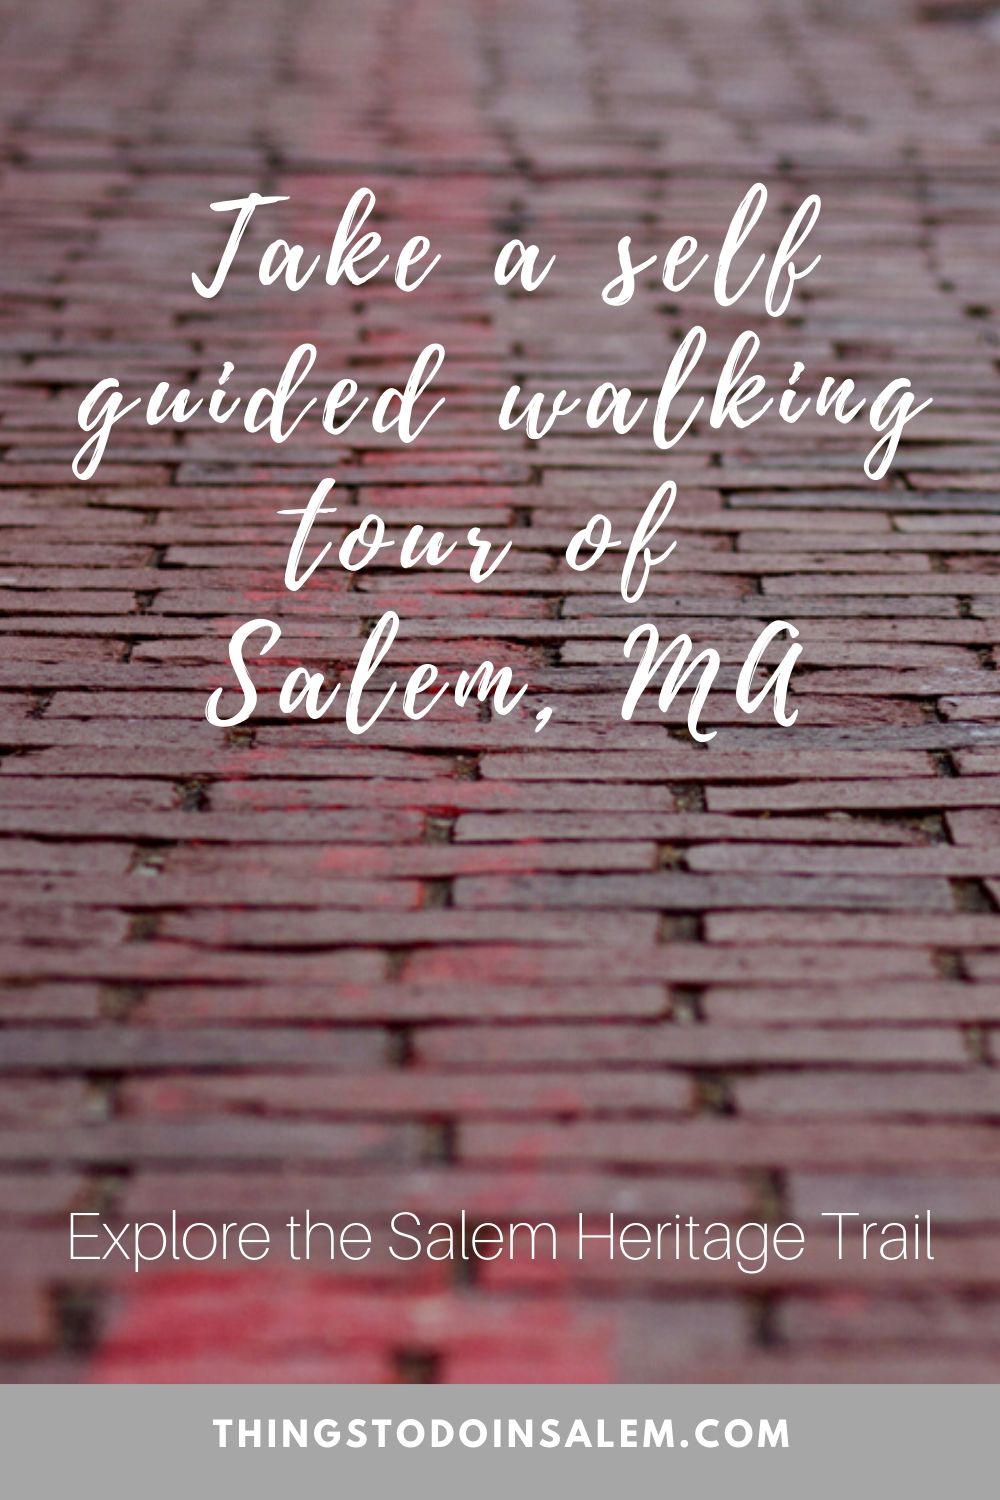 things to do in salem, salem heritage trail